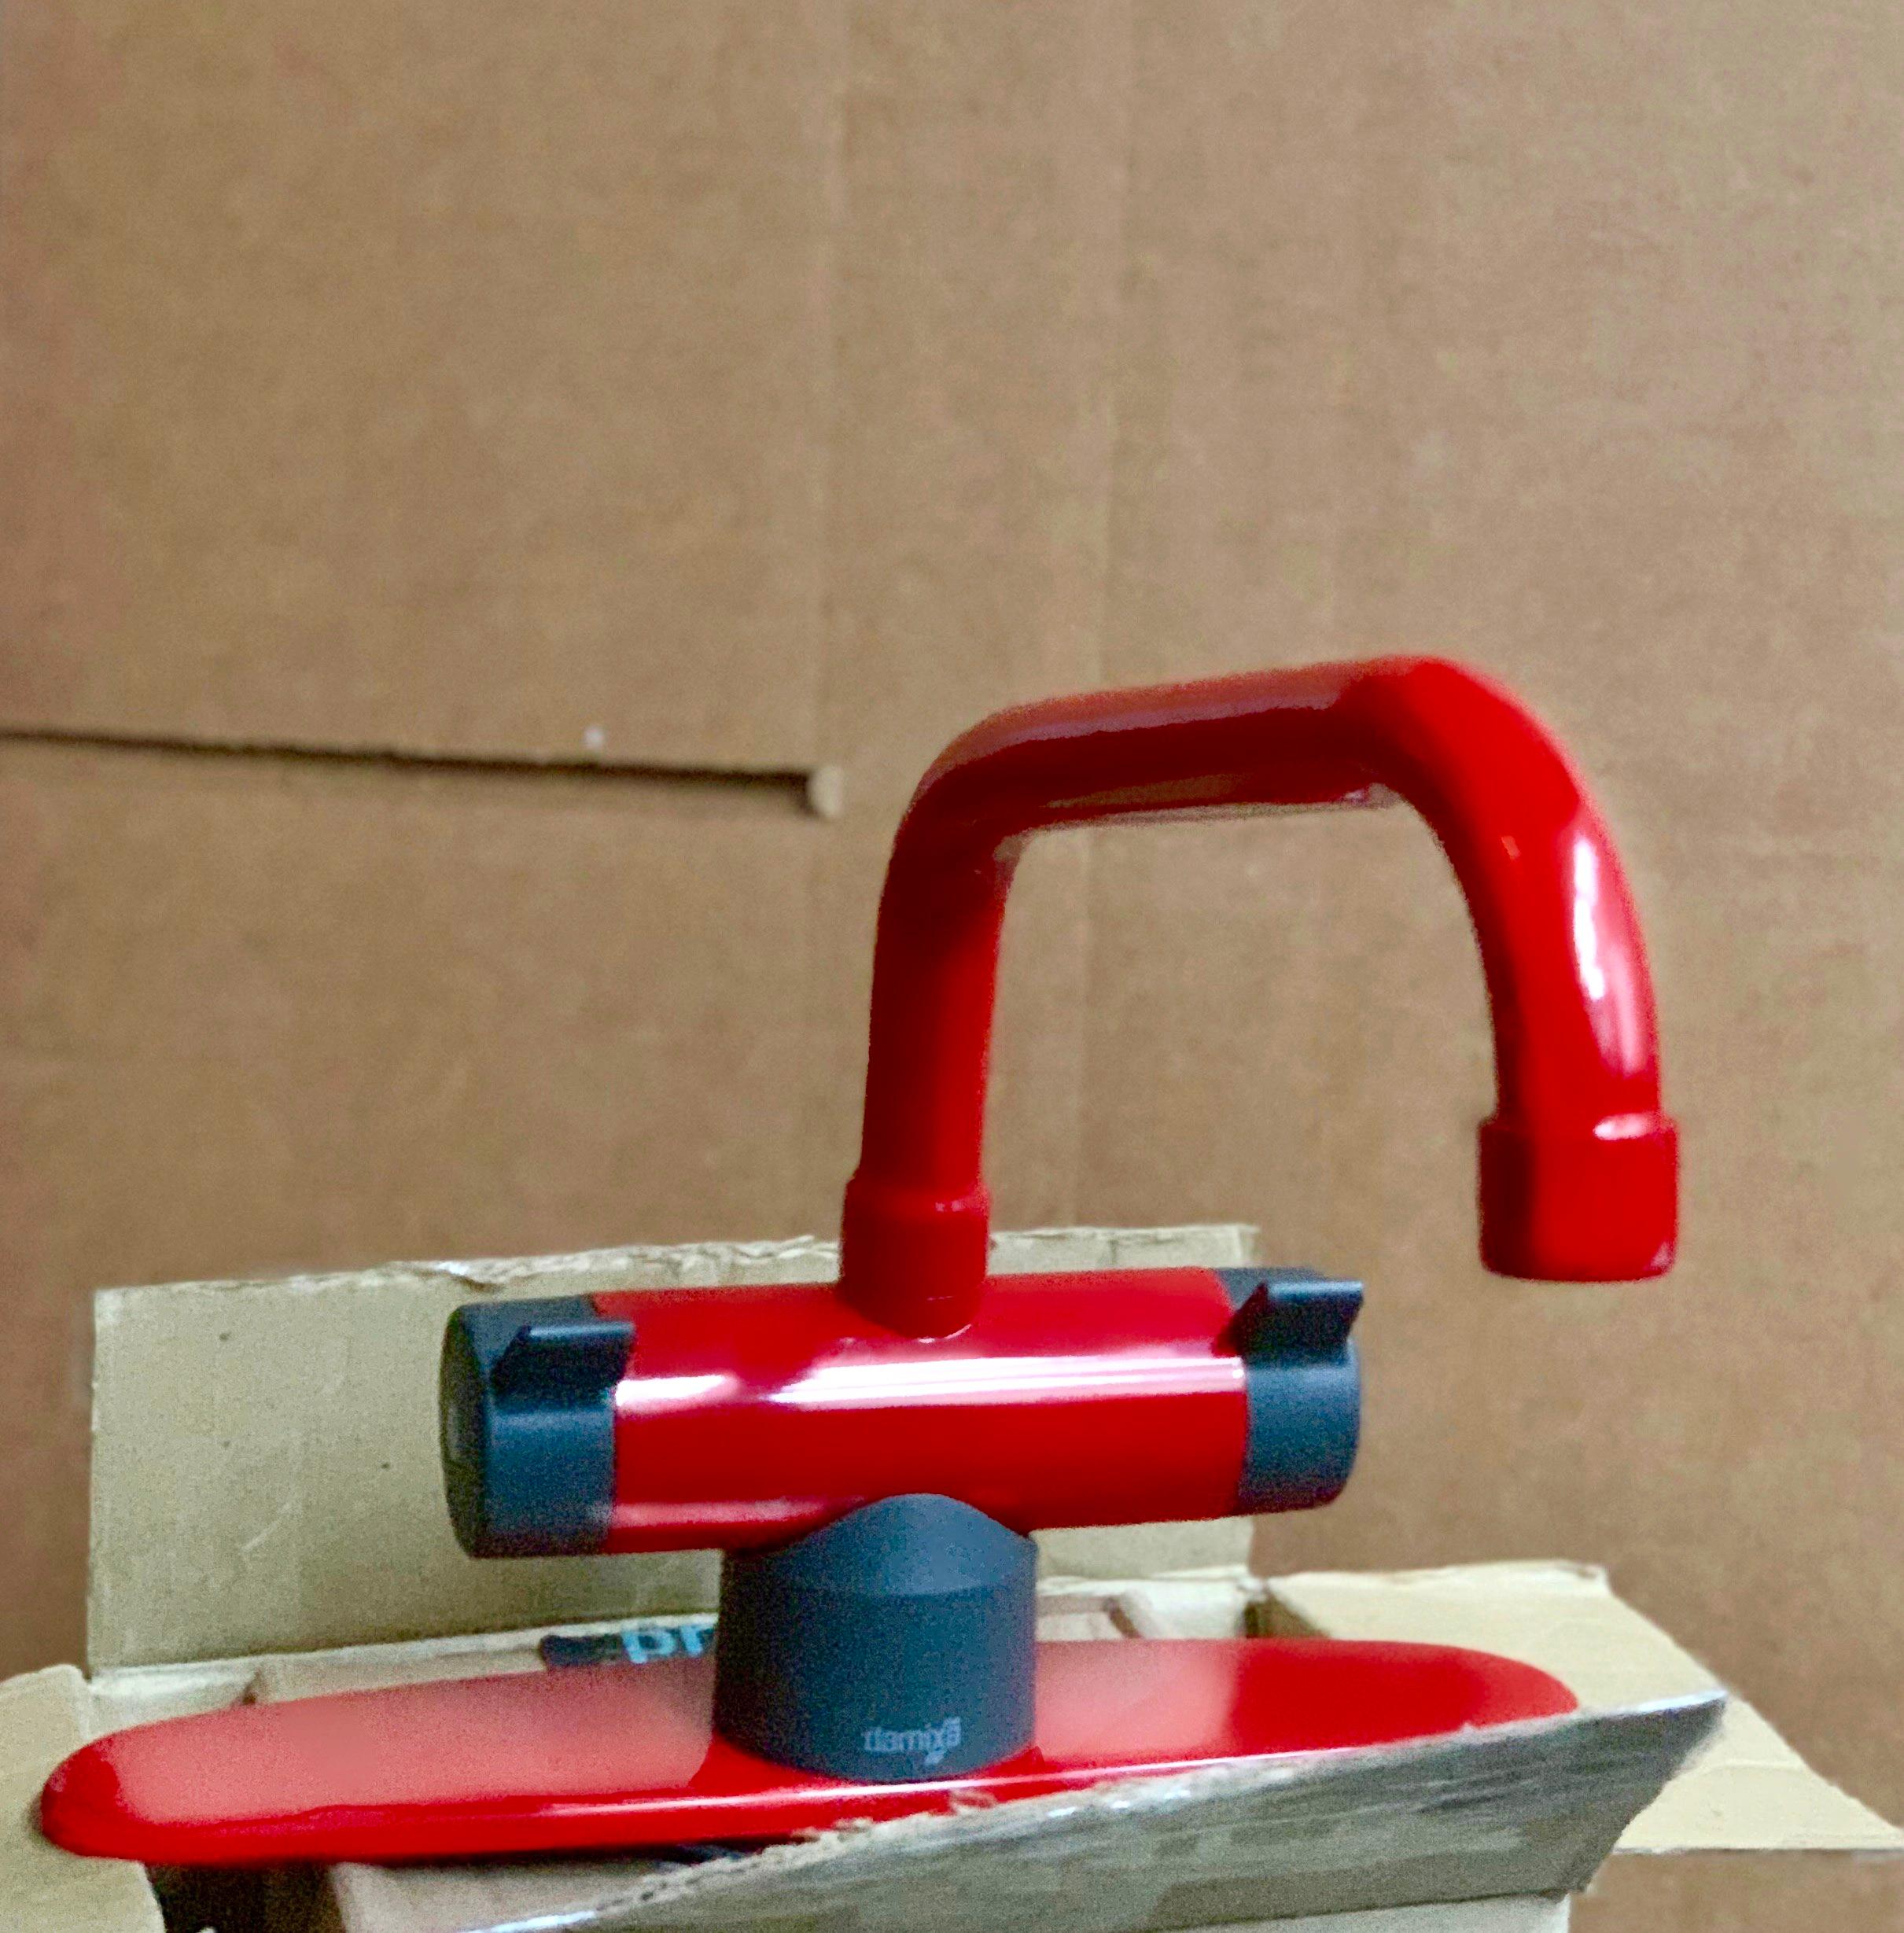 Vintage Scandinavian Modern Damixa faucet fitting, cherry red, Denmark, 1983. Damixa invented the single-handled faucet in 1966 and began using the iconic red / blue button in 1983. Extremely rare vintage piece in custom cherry red with gray